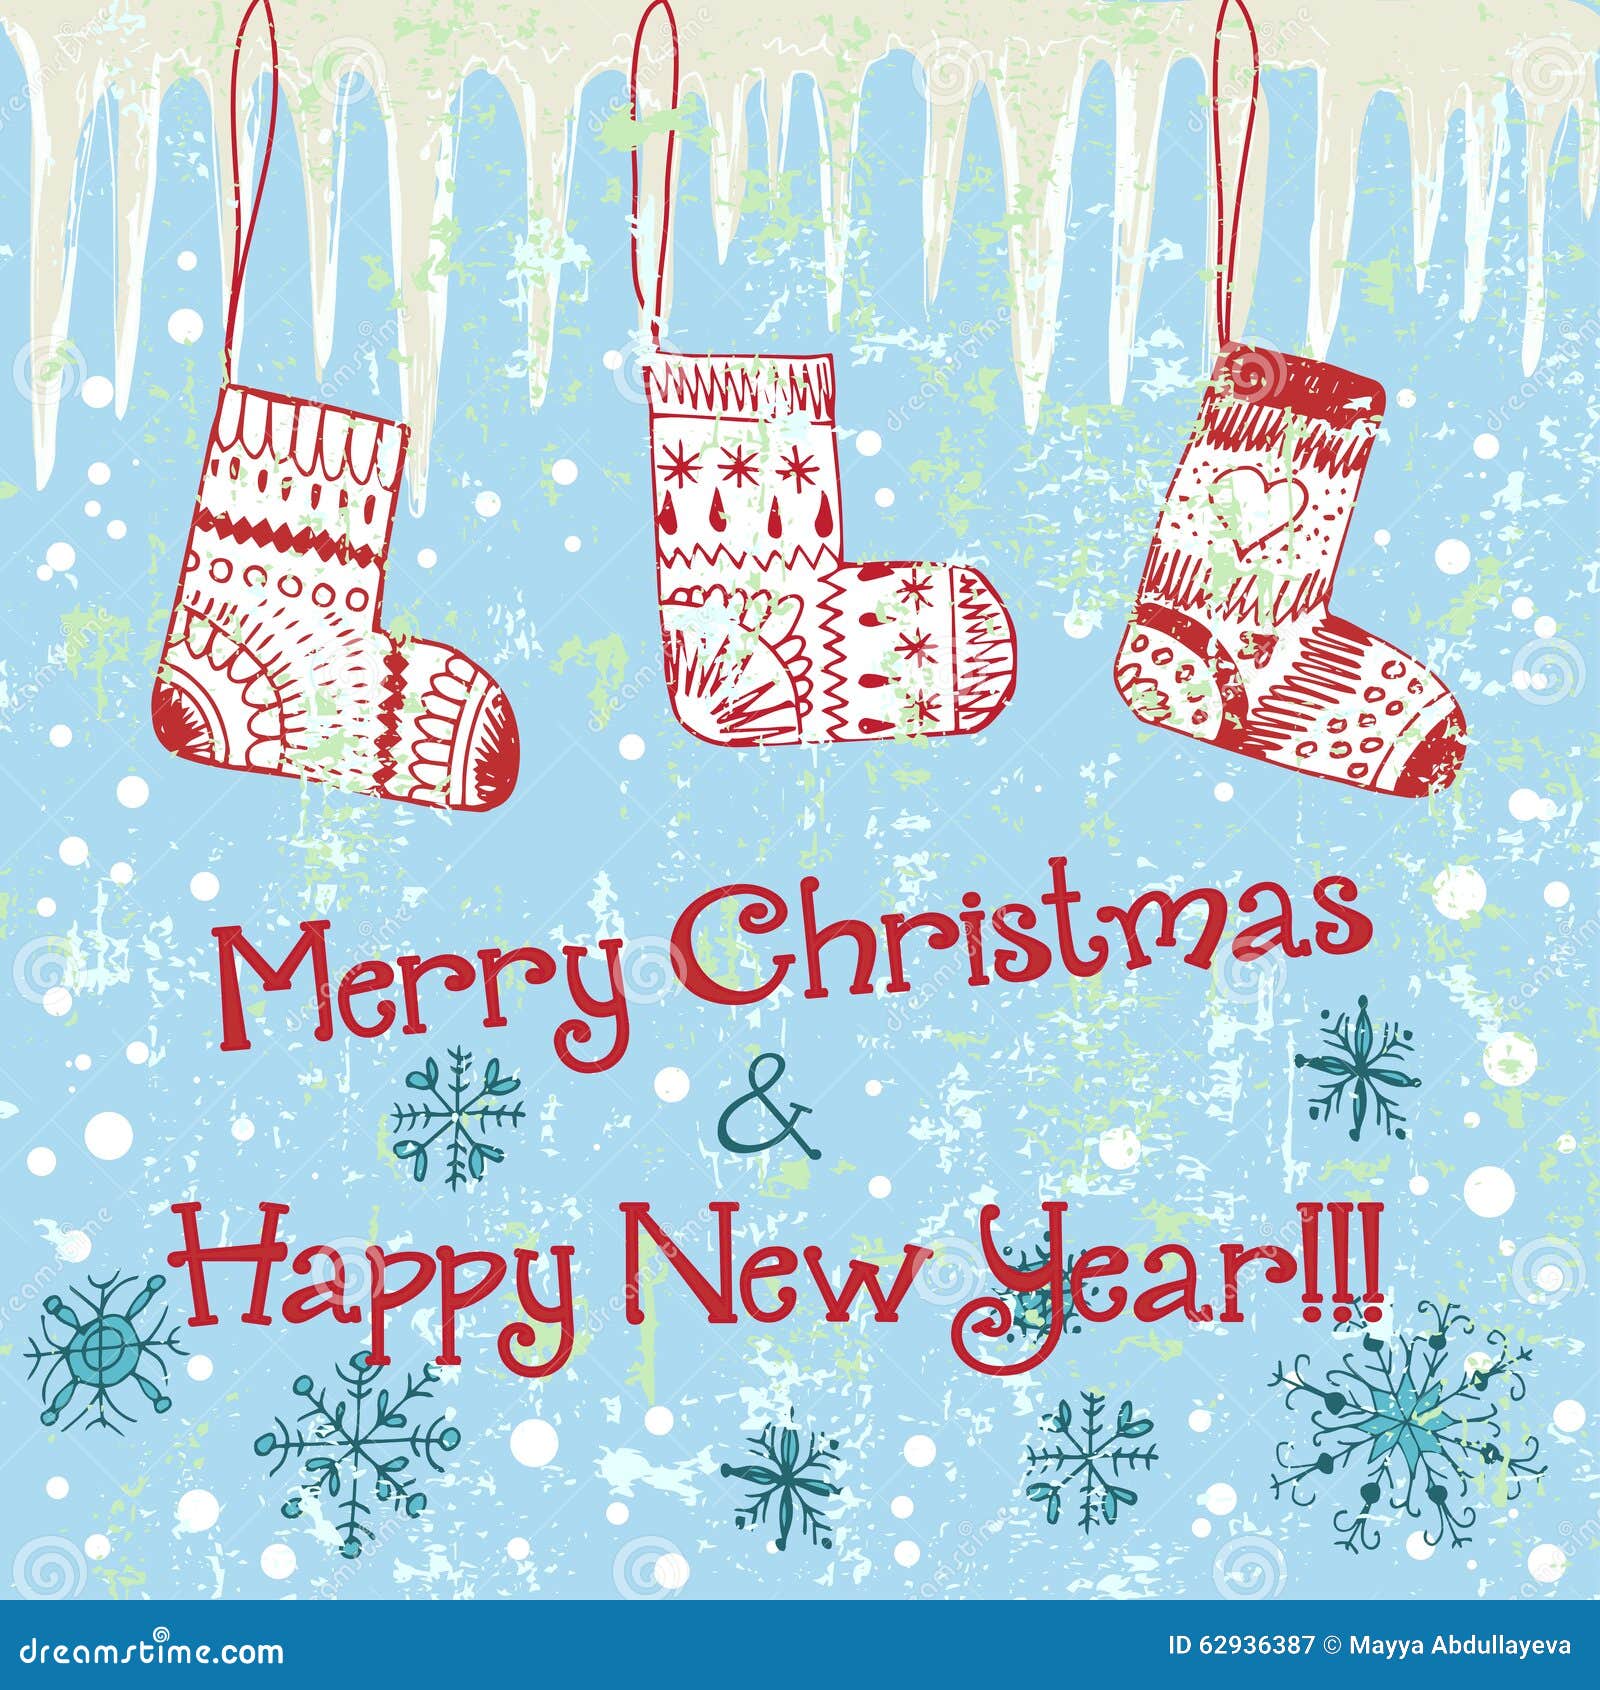 Download Hand Drawn Cute Christmas Card With Icicle Stock Vector Illustration of fashioned imagery